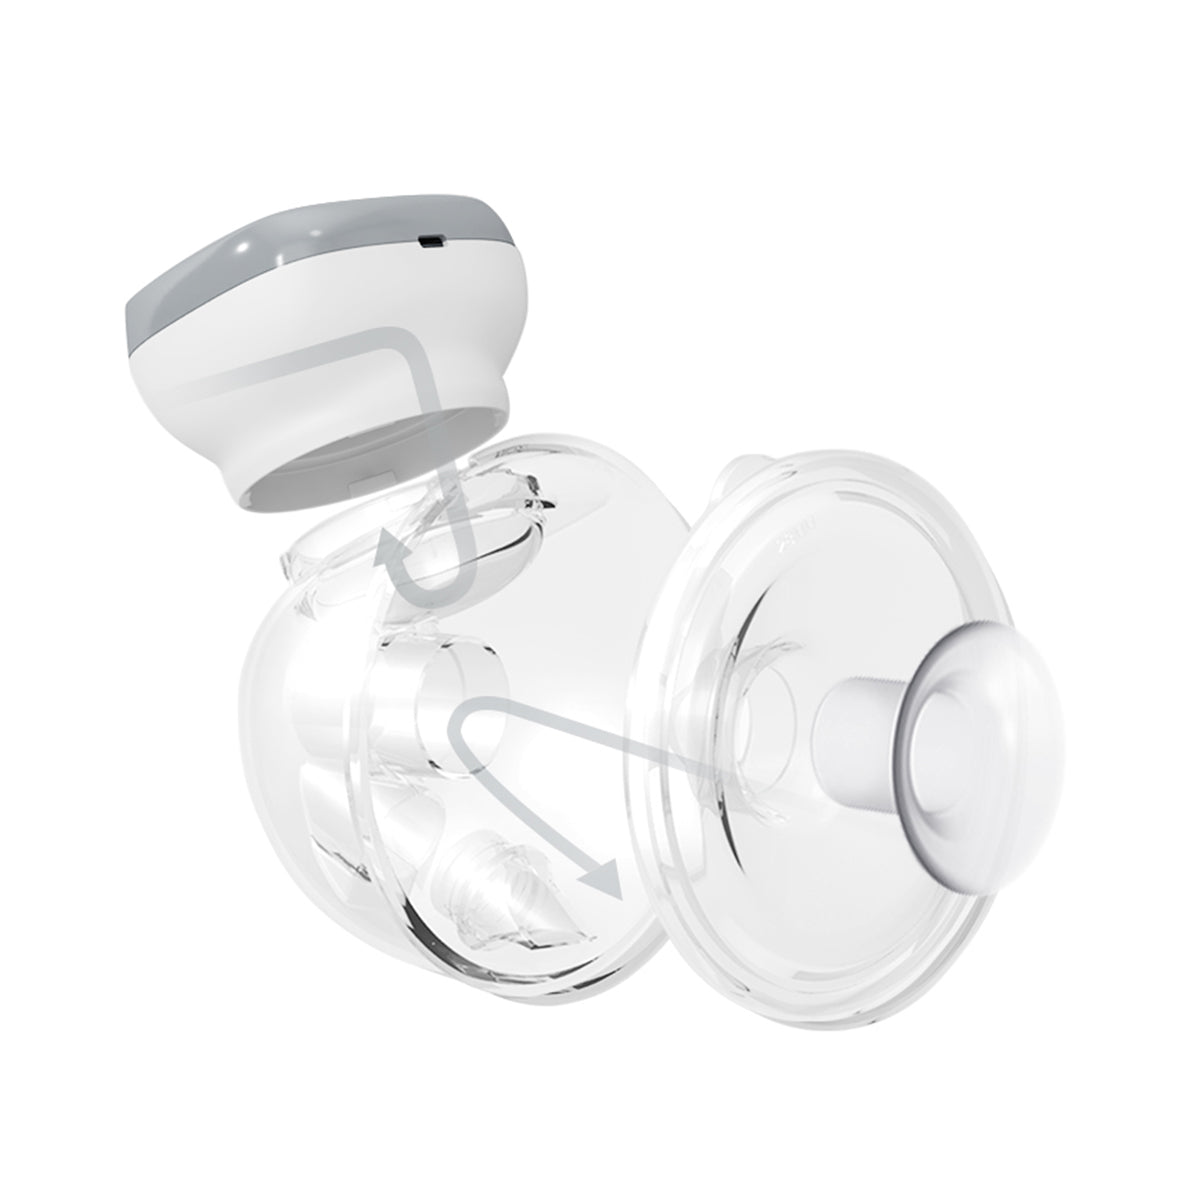 Babyono hands free electronic breast pump